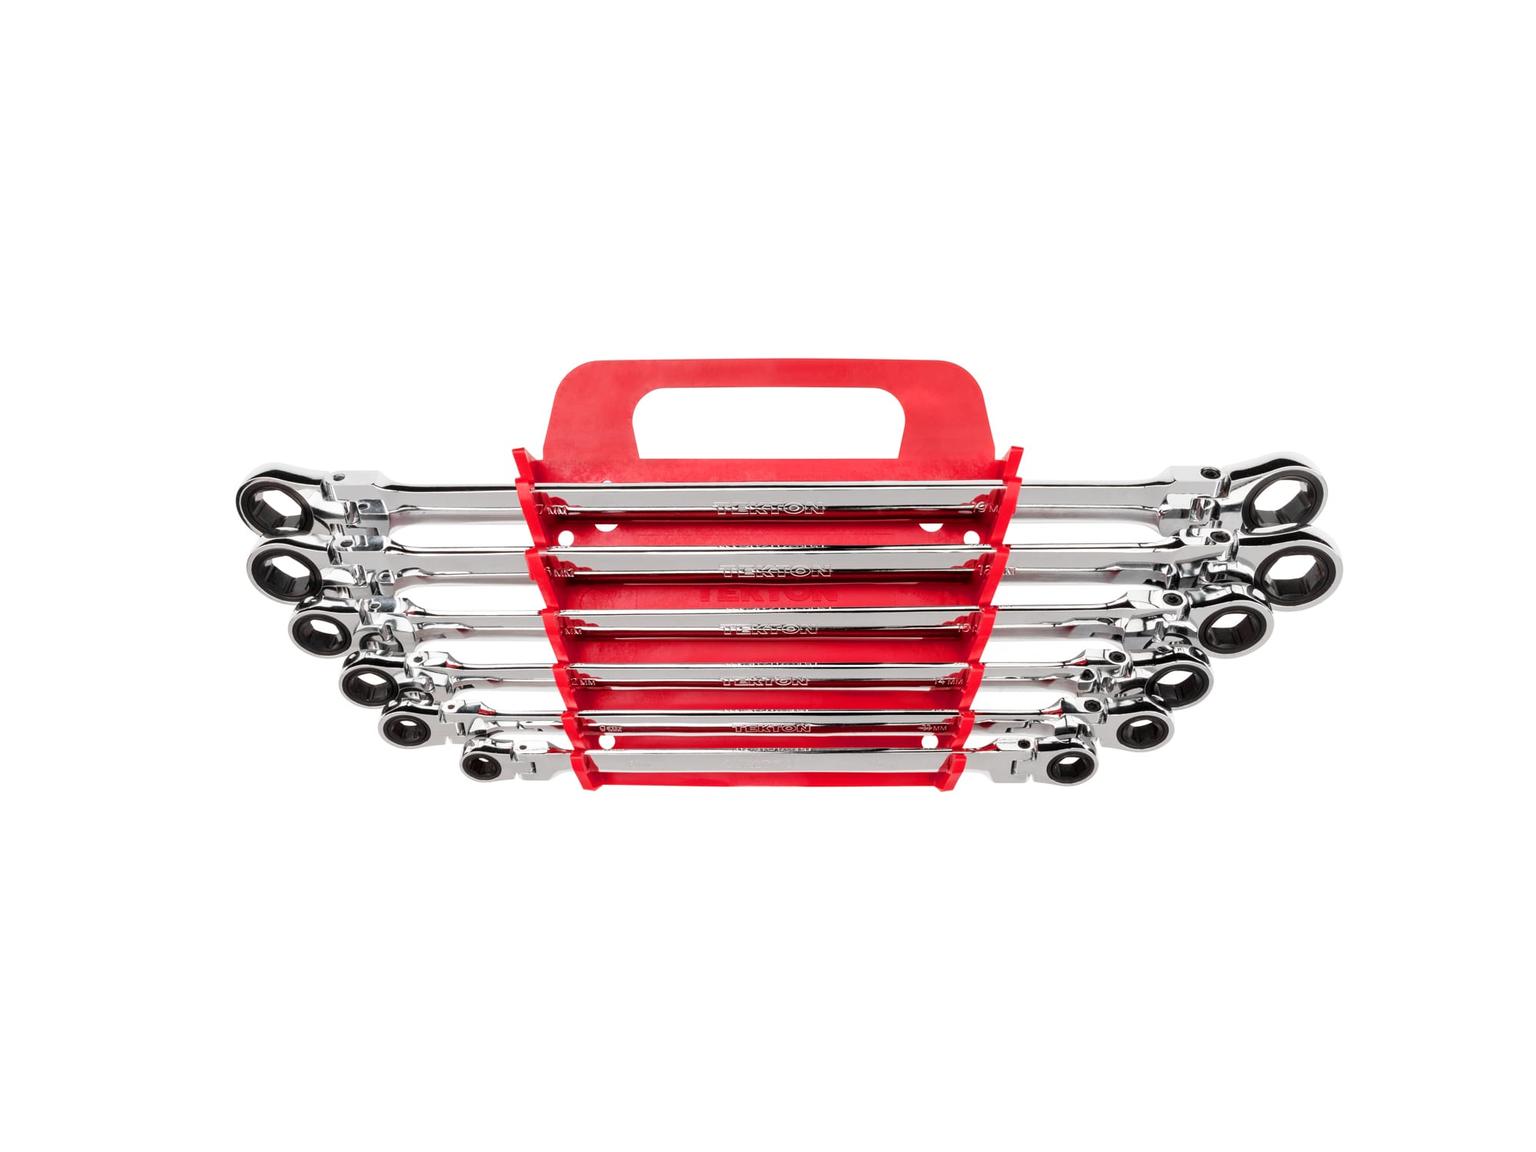 TEKTON WRN77164-T Long Flex Ratcheting Box End Wrench Set with Holder, 6-Piece (8-19 mm)